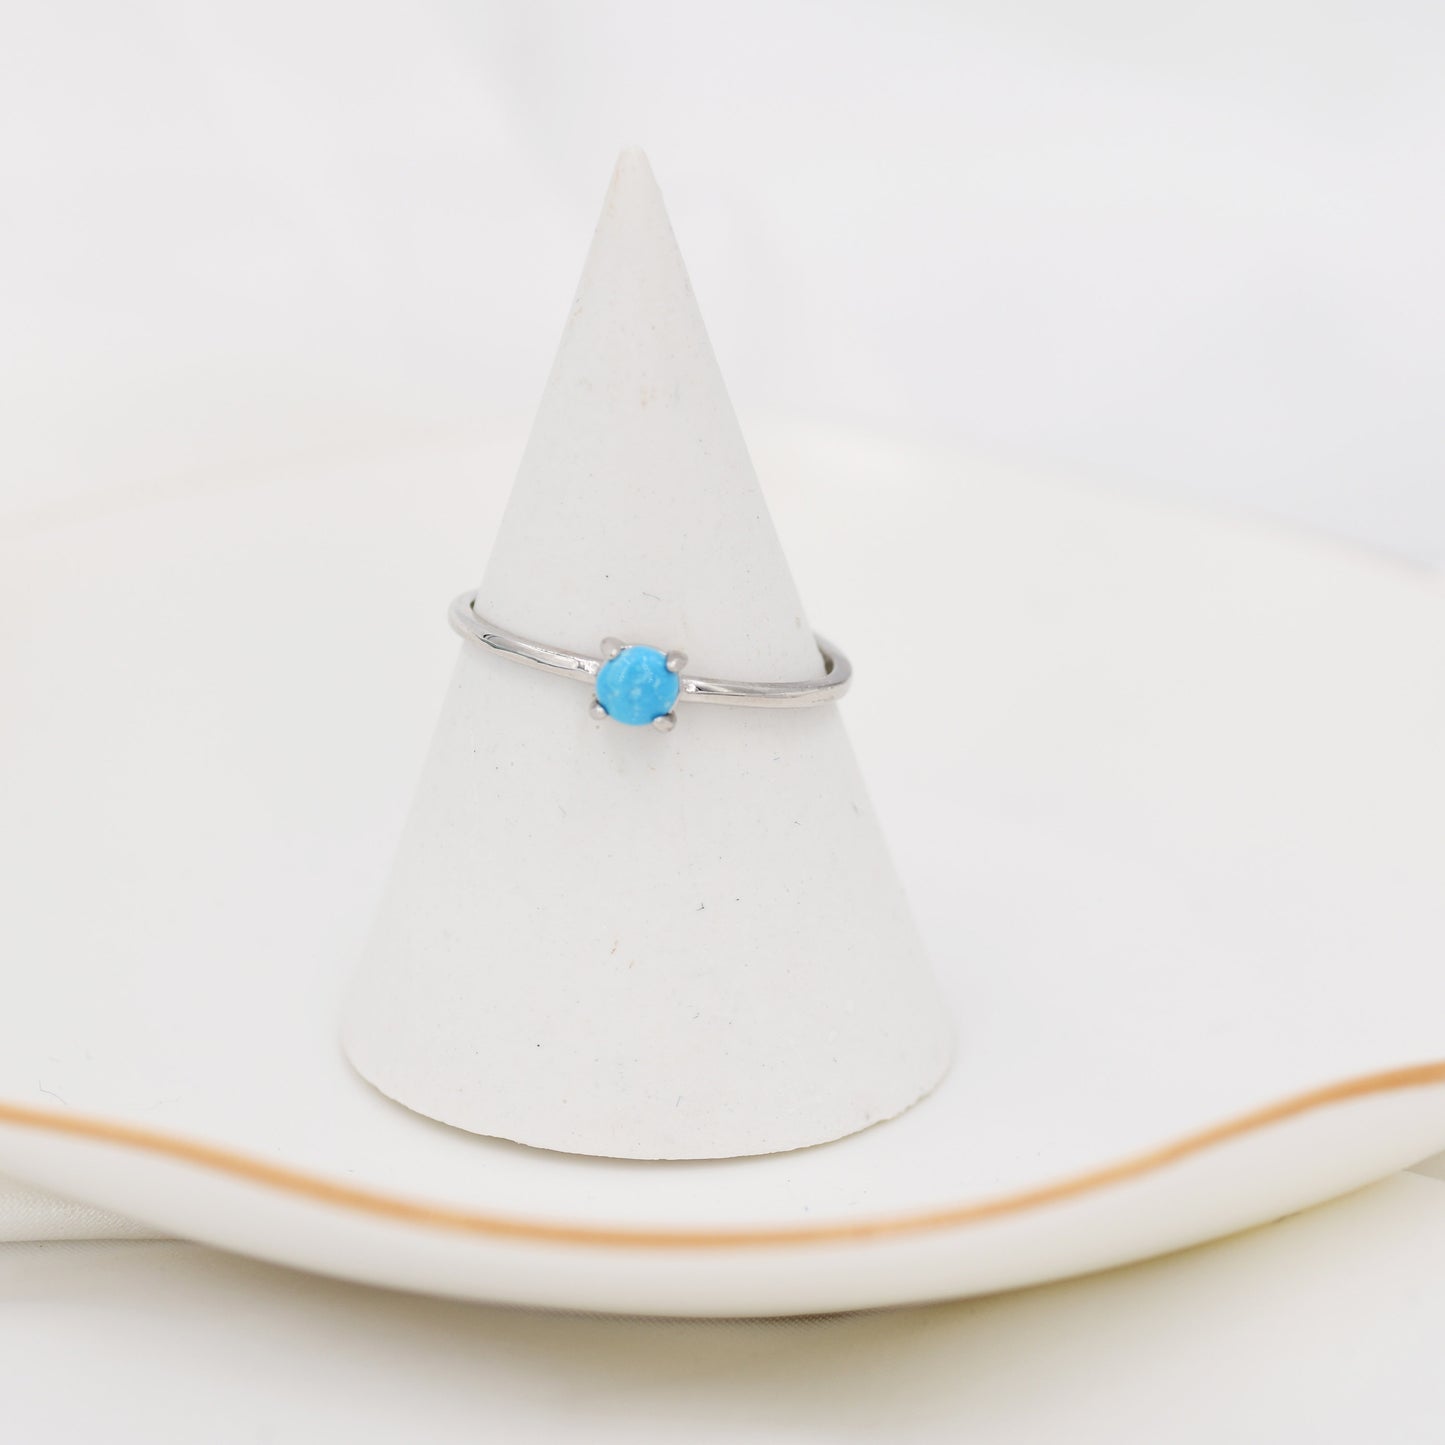 Genuine Turquoise Stone Ring in Sterling Silver, US 5 - 8, Natural Blue Turquoise Ring, December Birthstone Ring